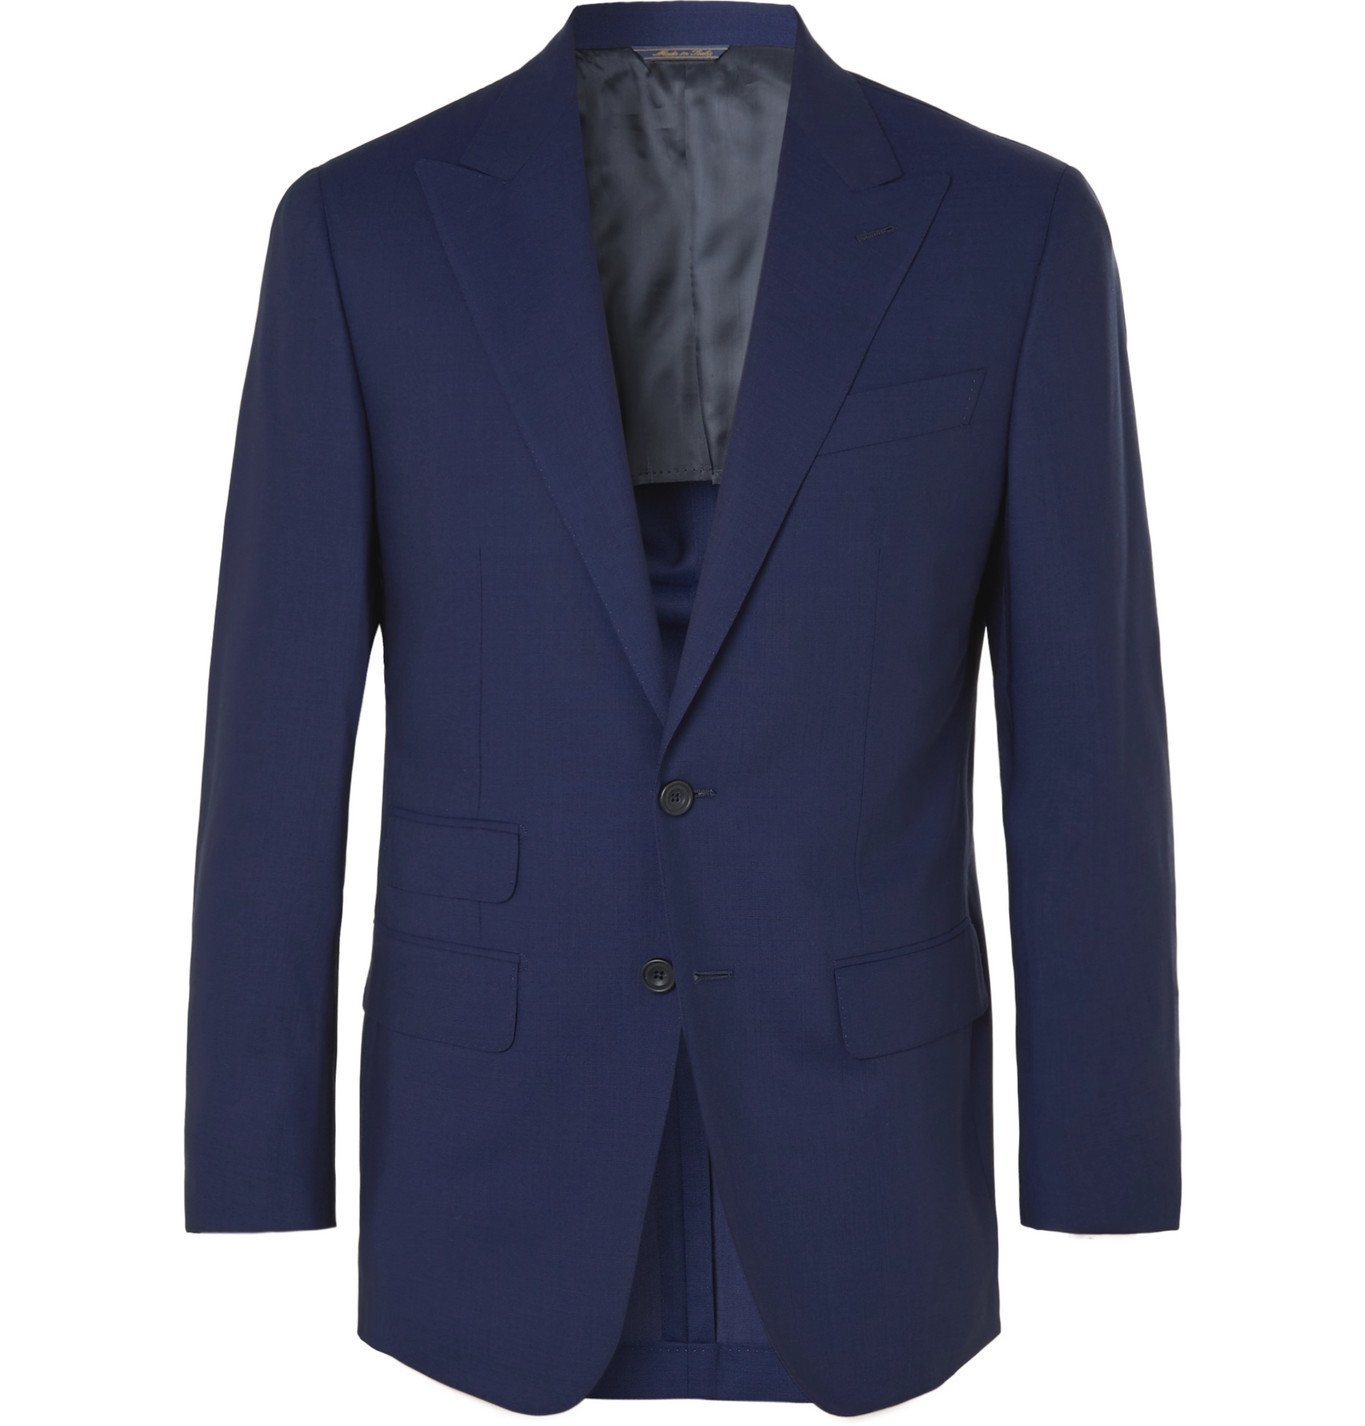 Thom Sweeney - Unstructured Wool Suit Jacket - Blue Thom Sweeney